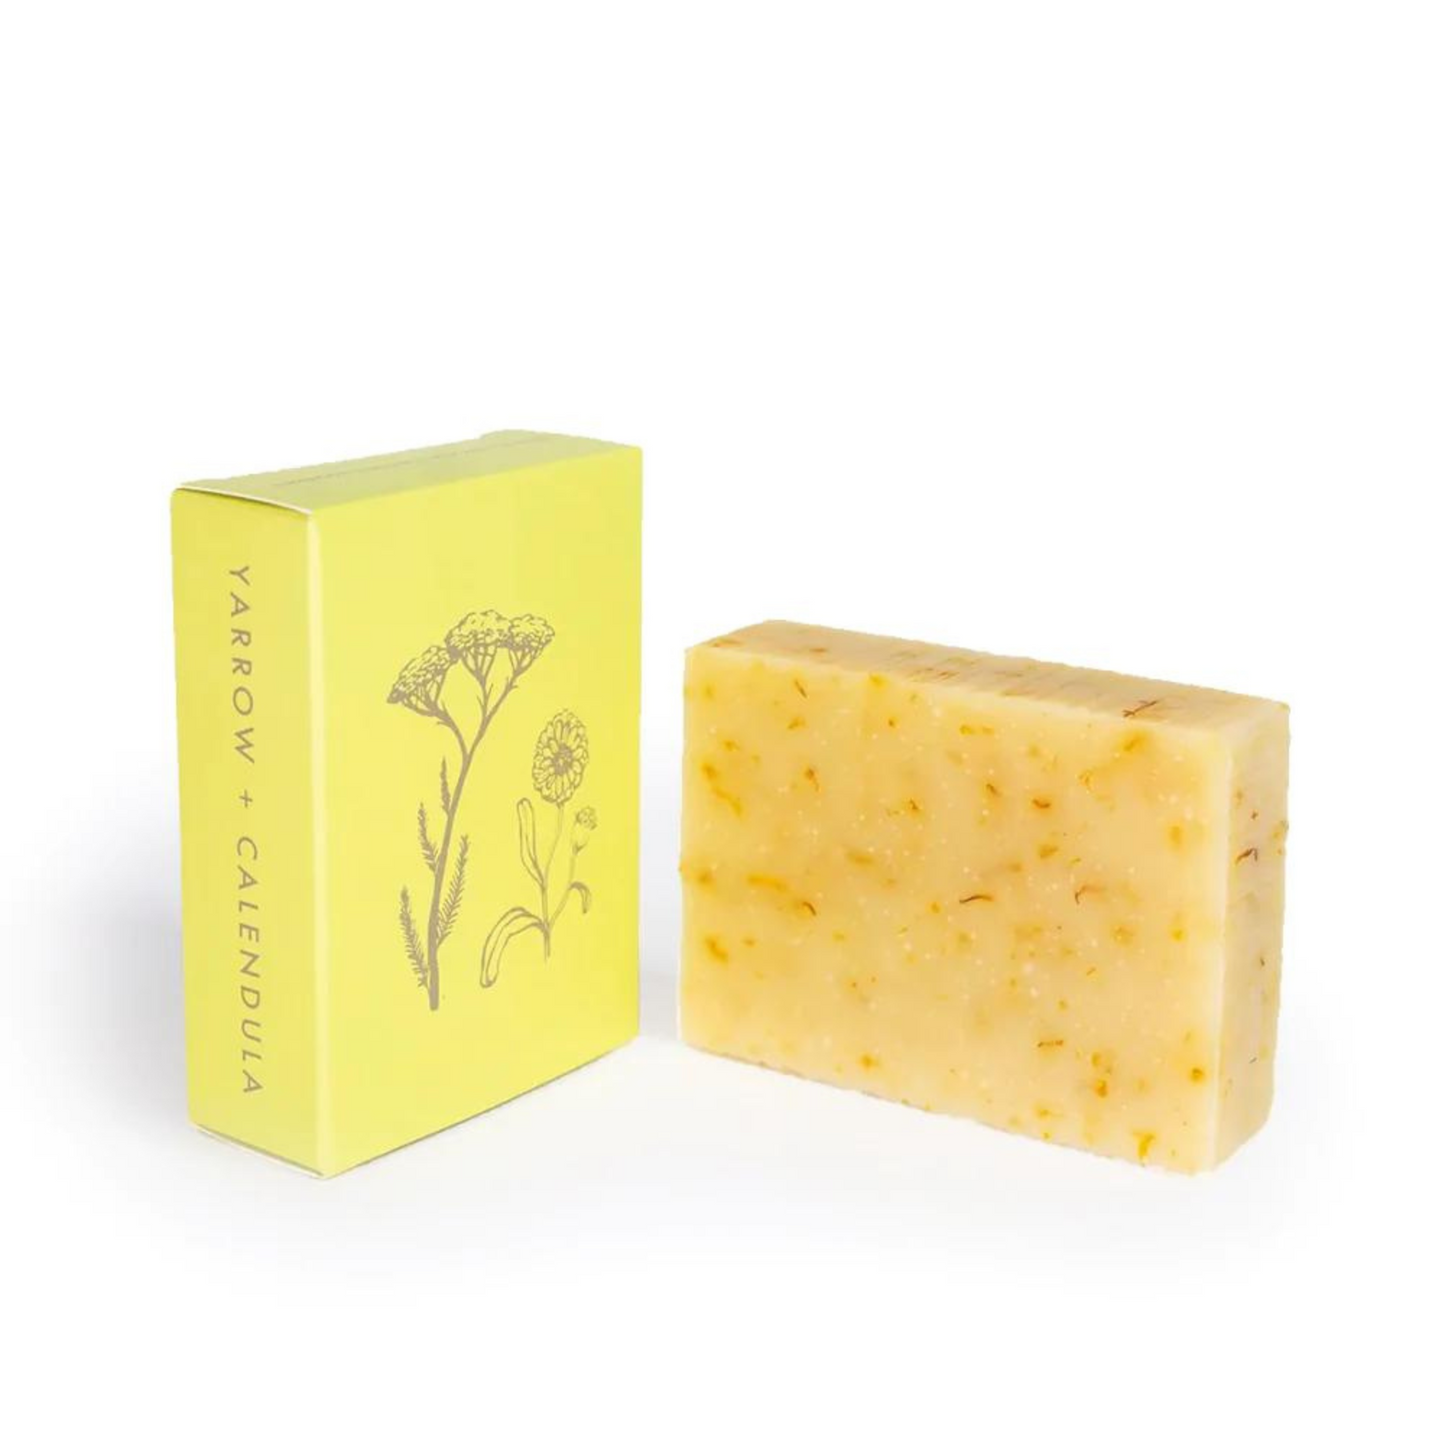 Primary Image of ALTR Yarrow and Calendula Soap Bar (120 g)